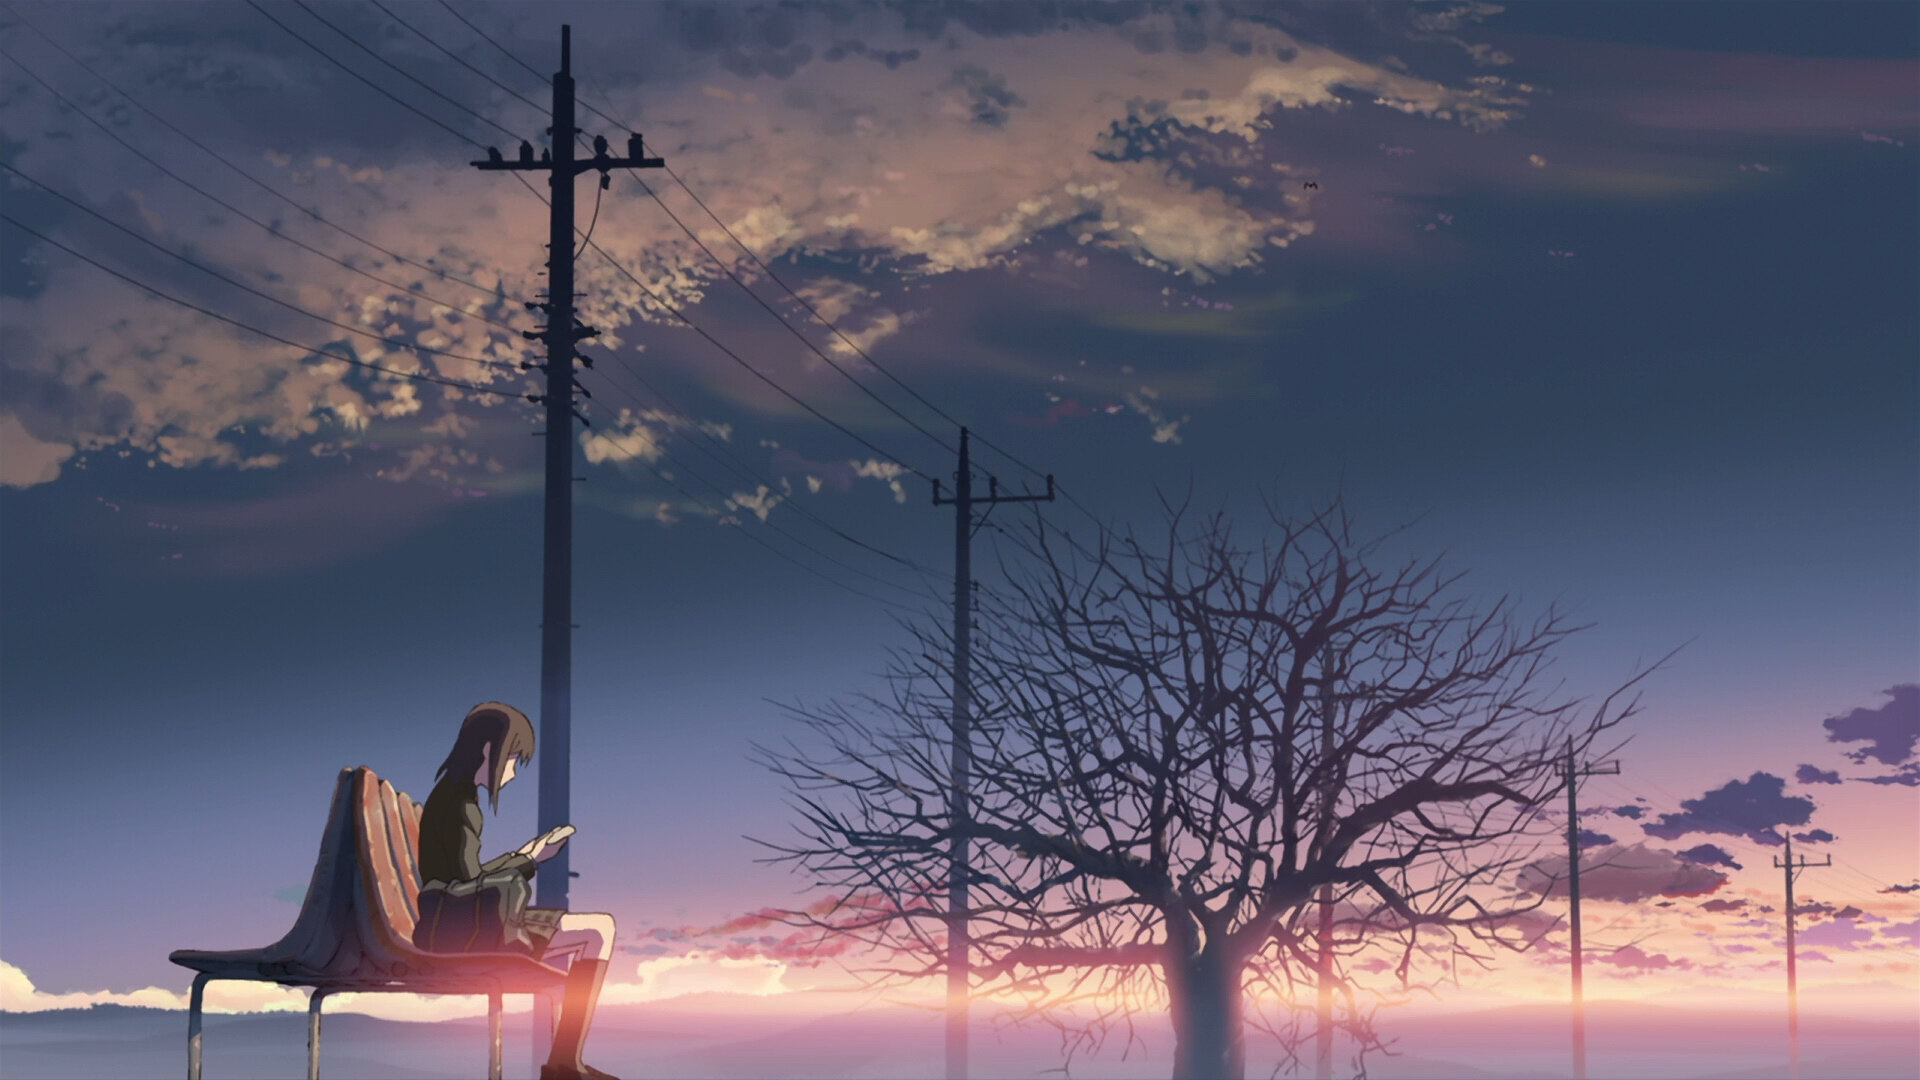 49-facts-about-the-movie-5-centimeters-per-second